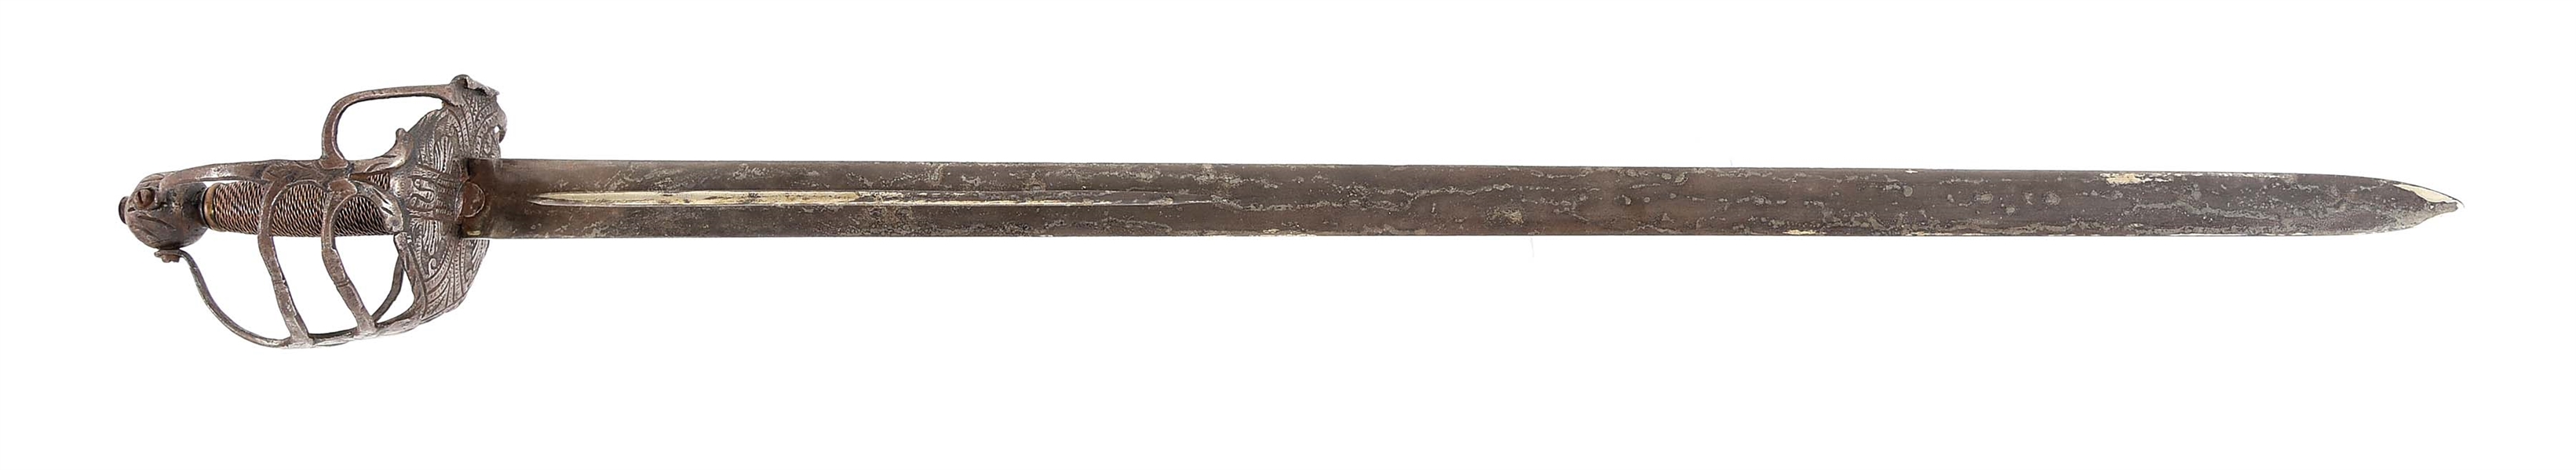 ENGLISH CIVIL WAR BASKET HILT, CHISELED IN THE MORTUARY STYLE.